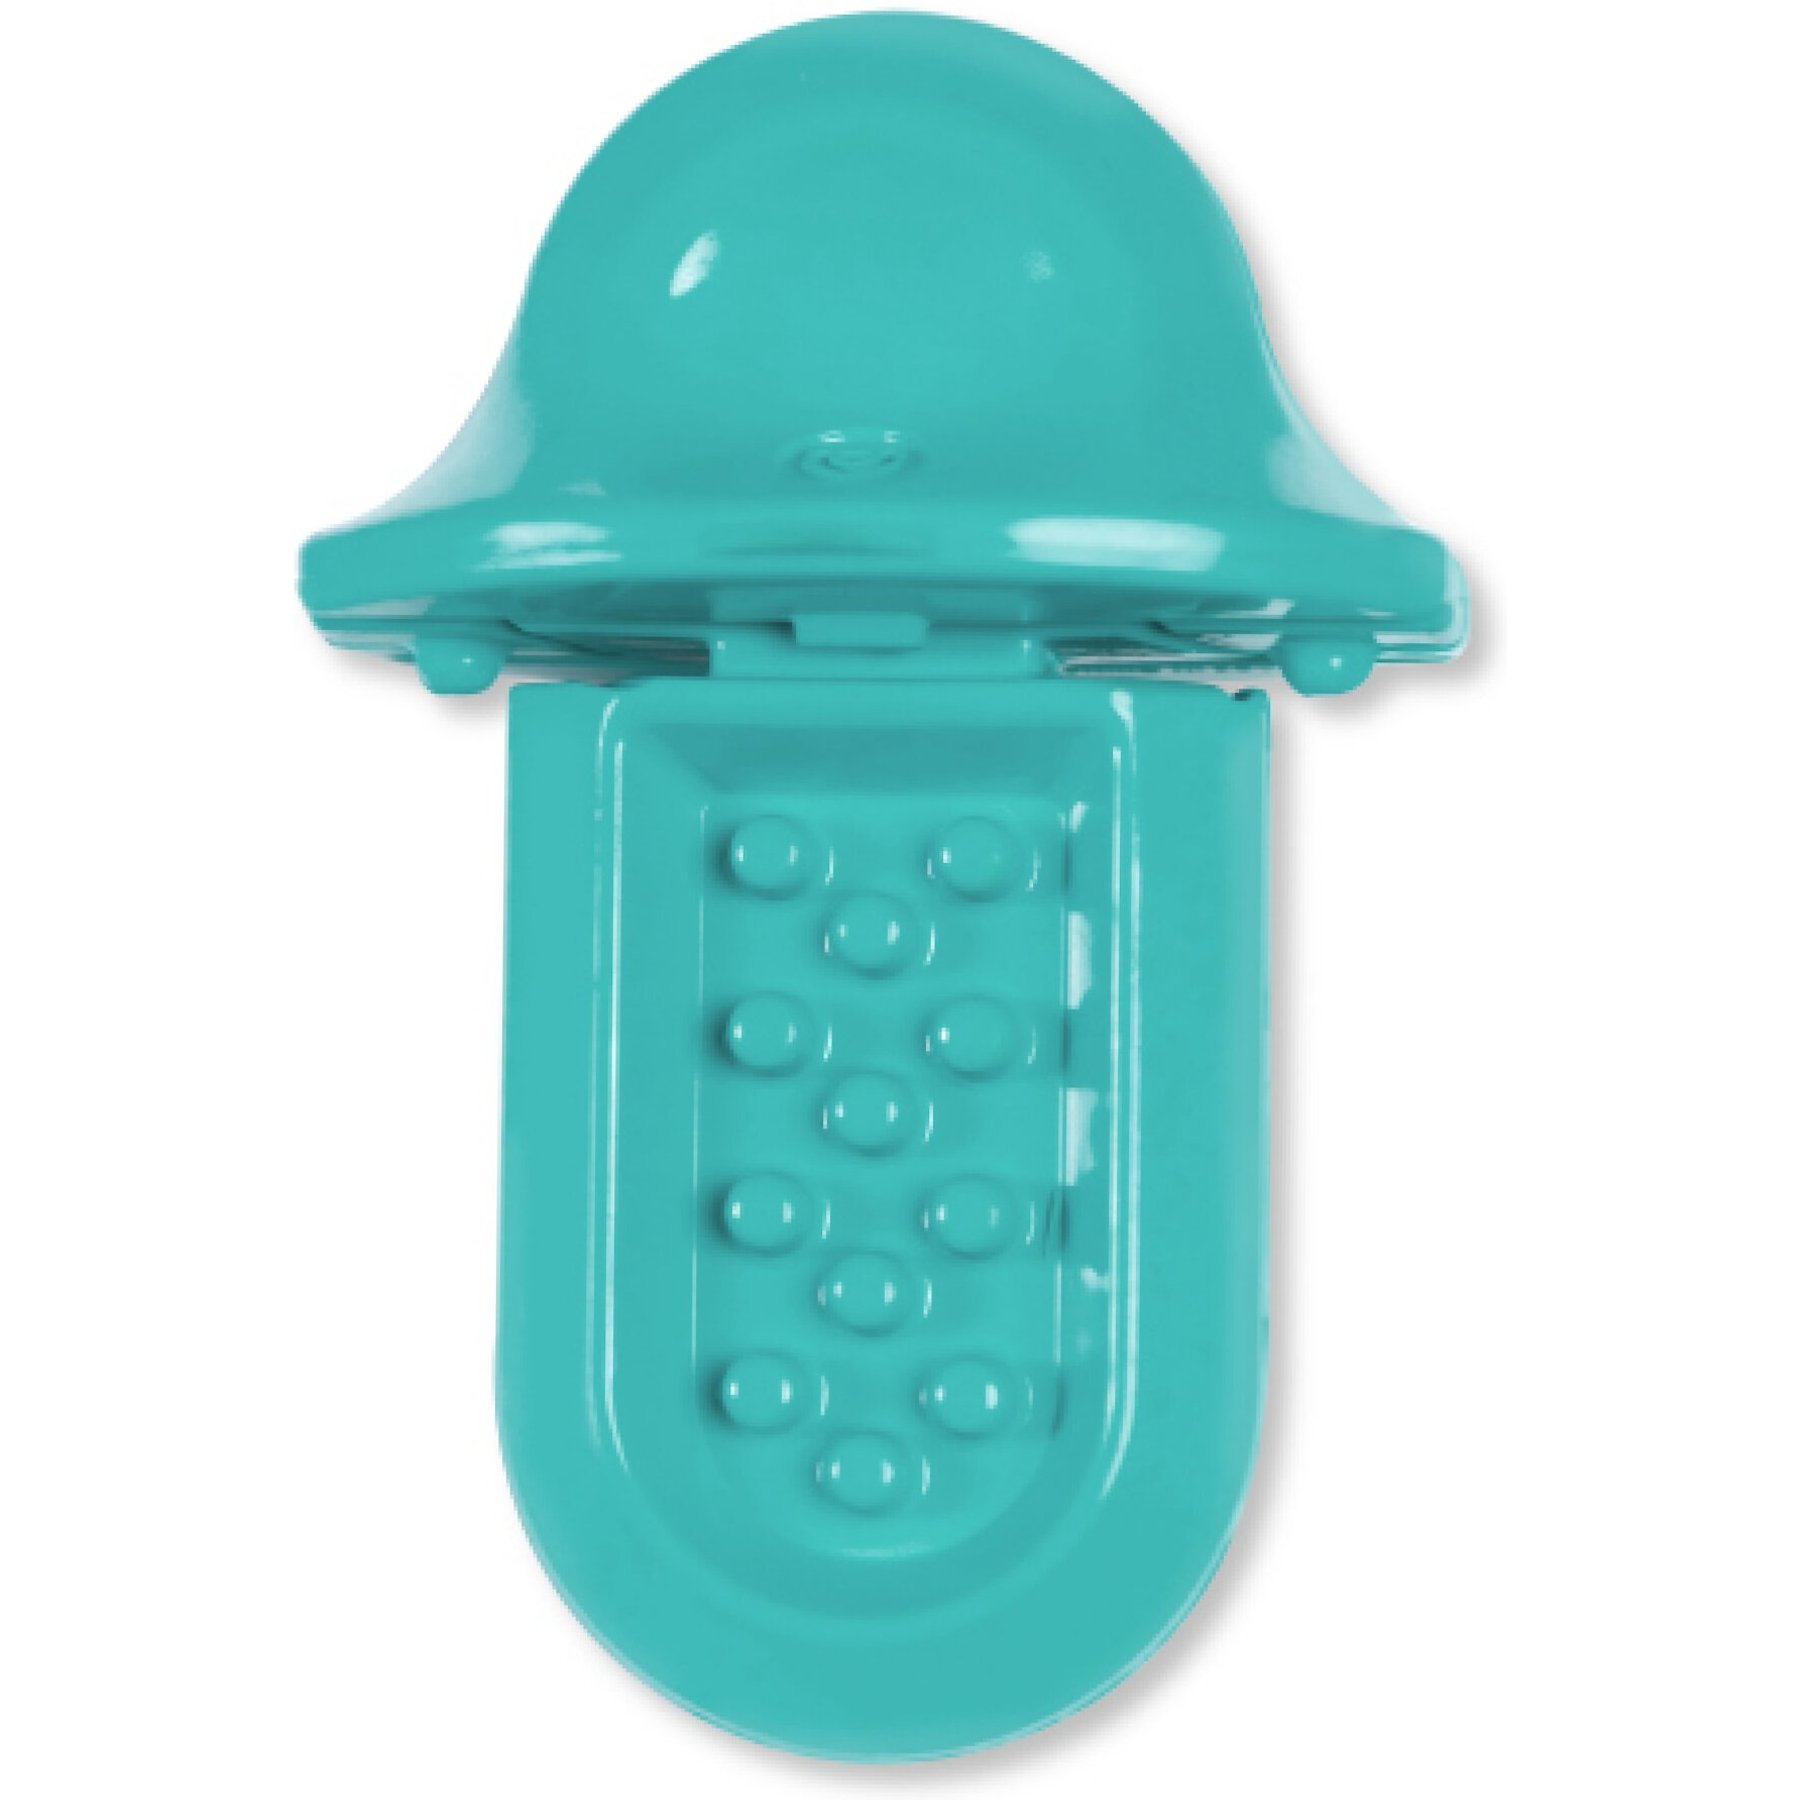 DIGGS Groov Dog Crate Training Tool, Turquoise 